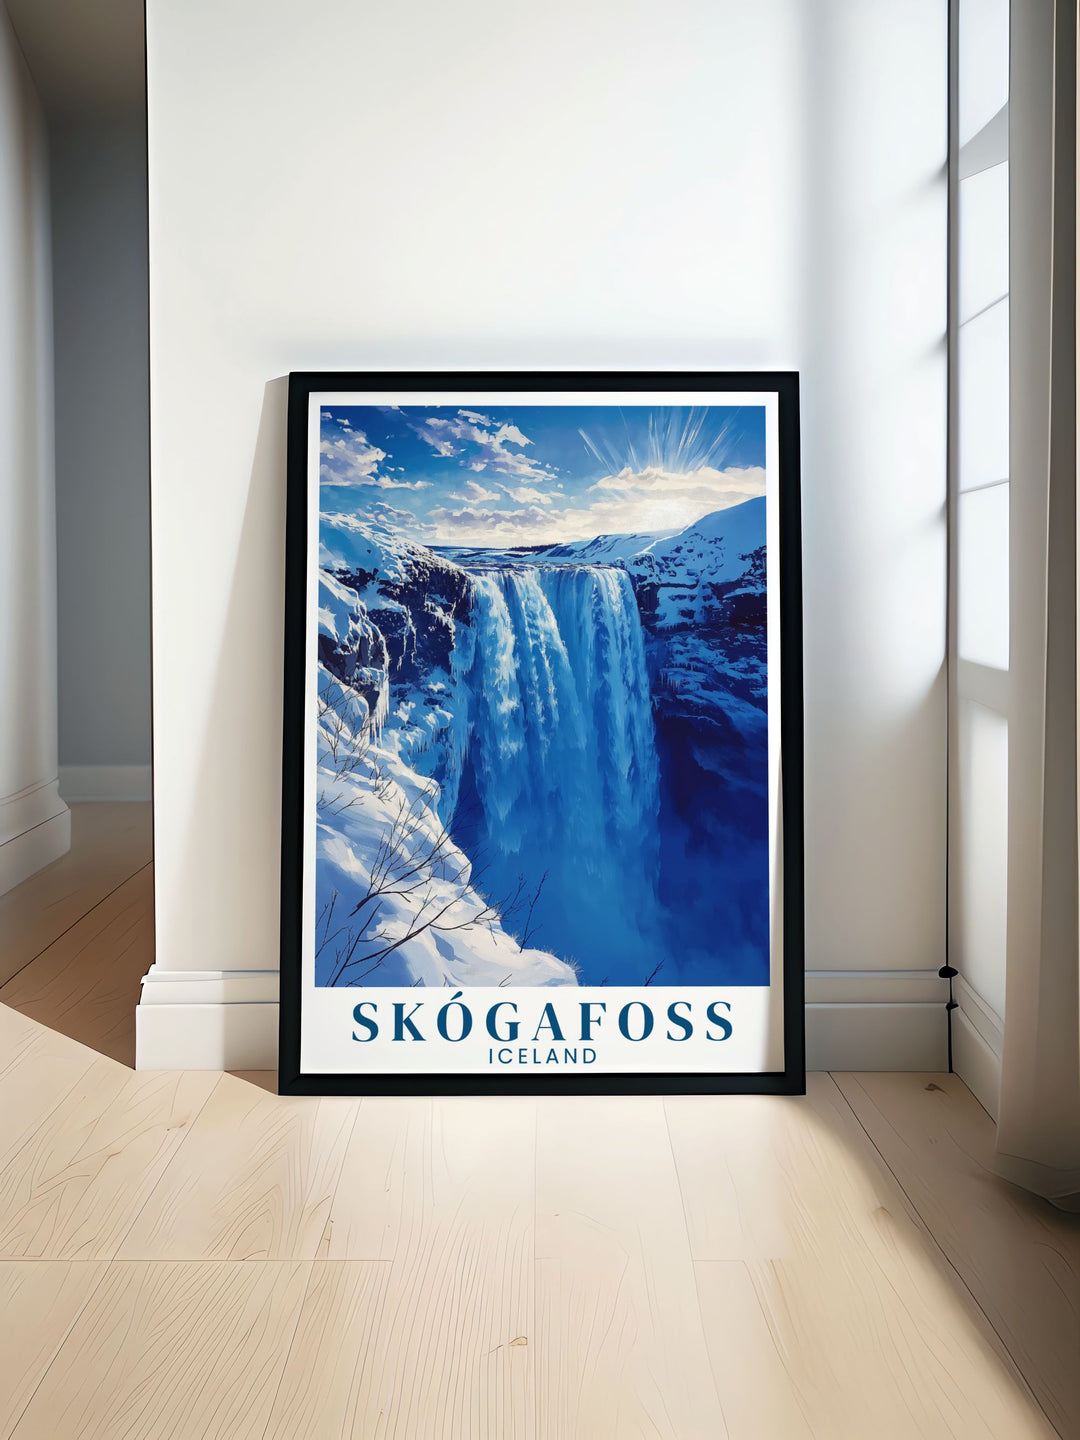 Stunning Skogafoss waterfall Winter travel poster showcasing the majestic beauty of the Icelandic waterfall surrounded by snow and ice perfect for adding a touch of winter wonderland to your home decor and inspiring your next adventure.